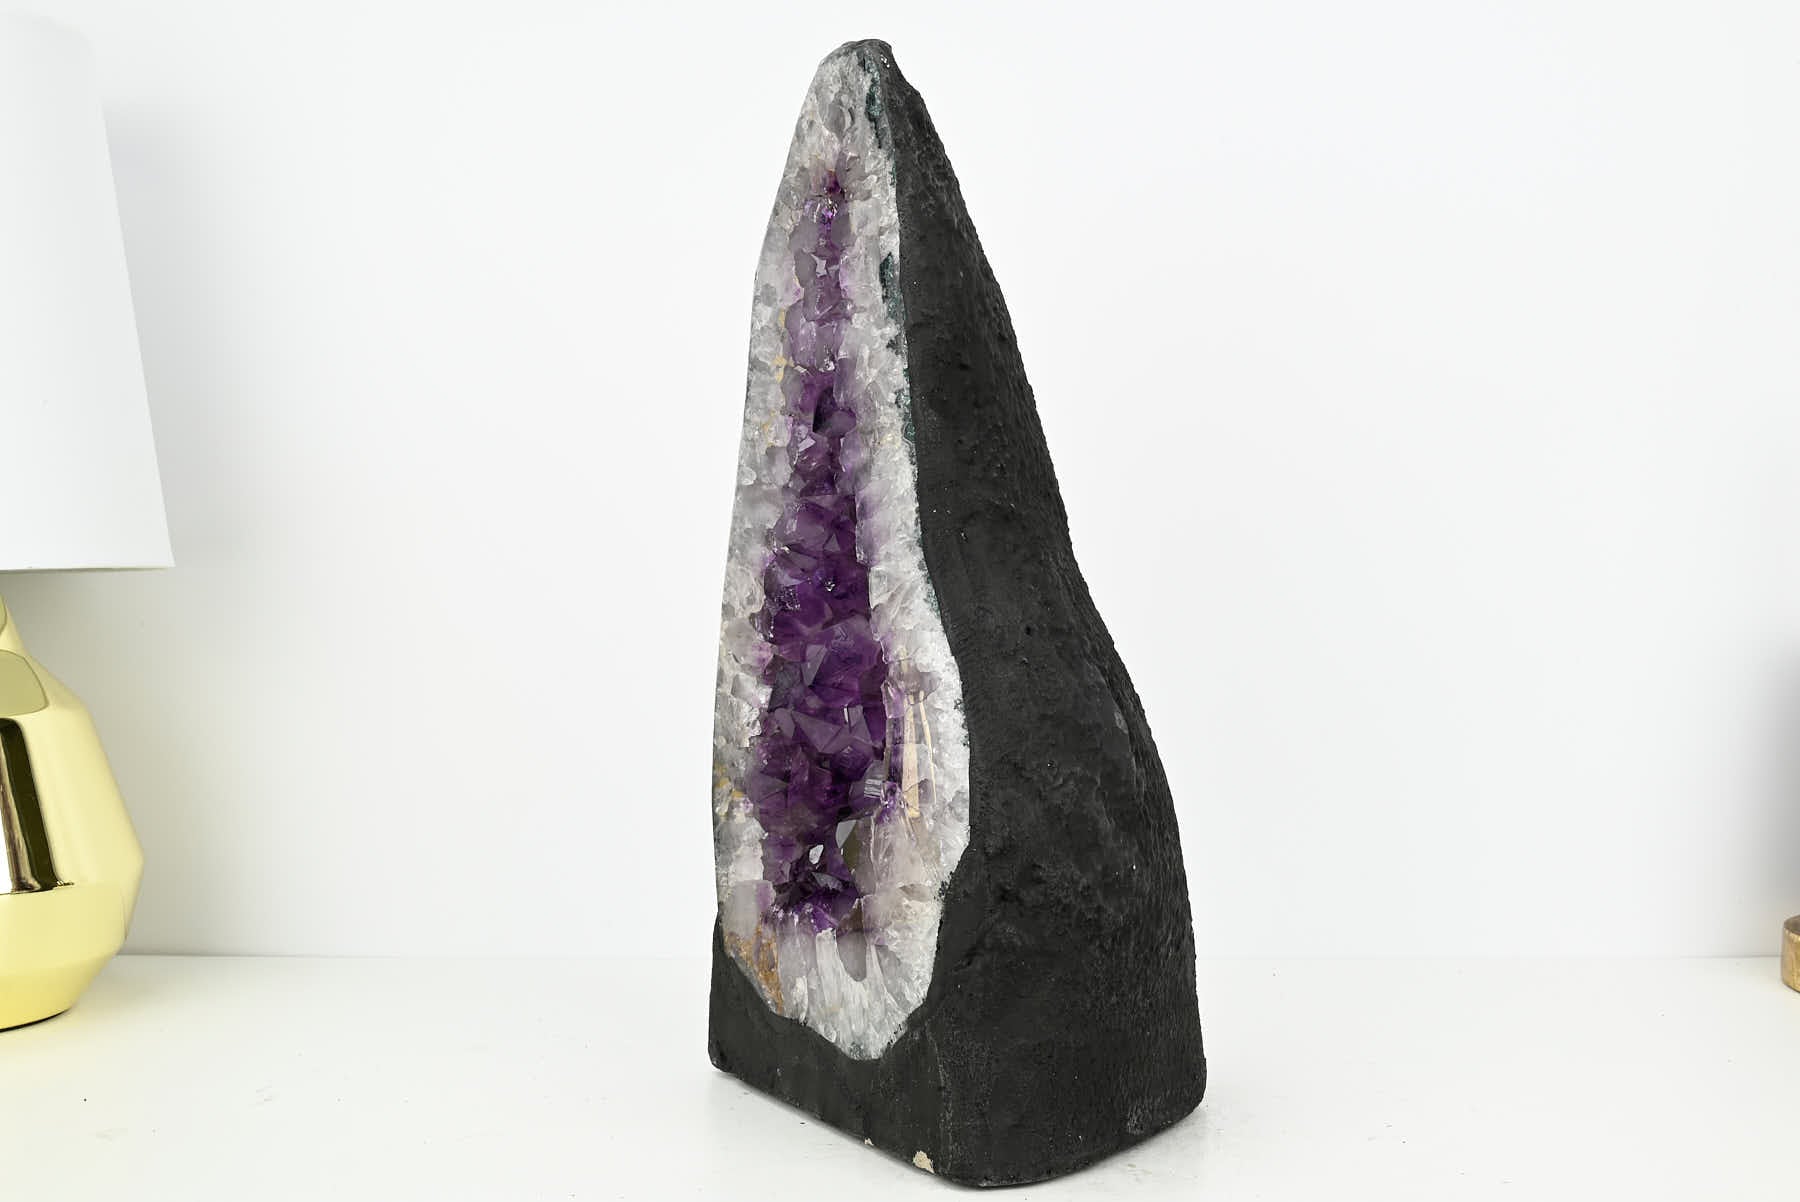 Extra Quality Amethyst Cathedral - 9.75kg, 37cm tall - #CAAMET-10051